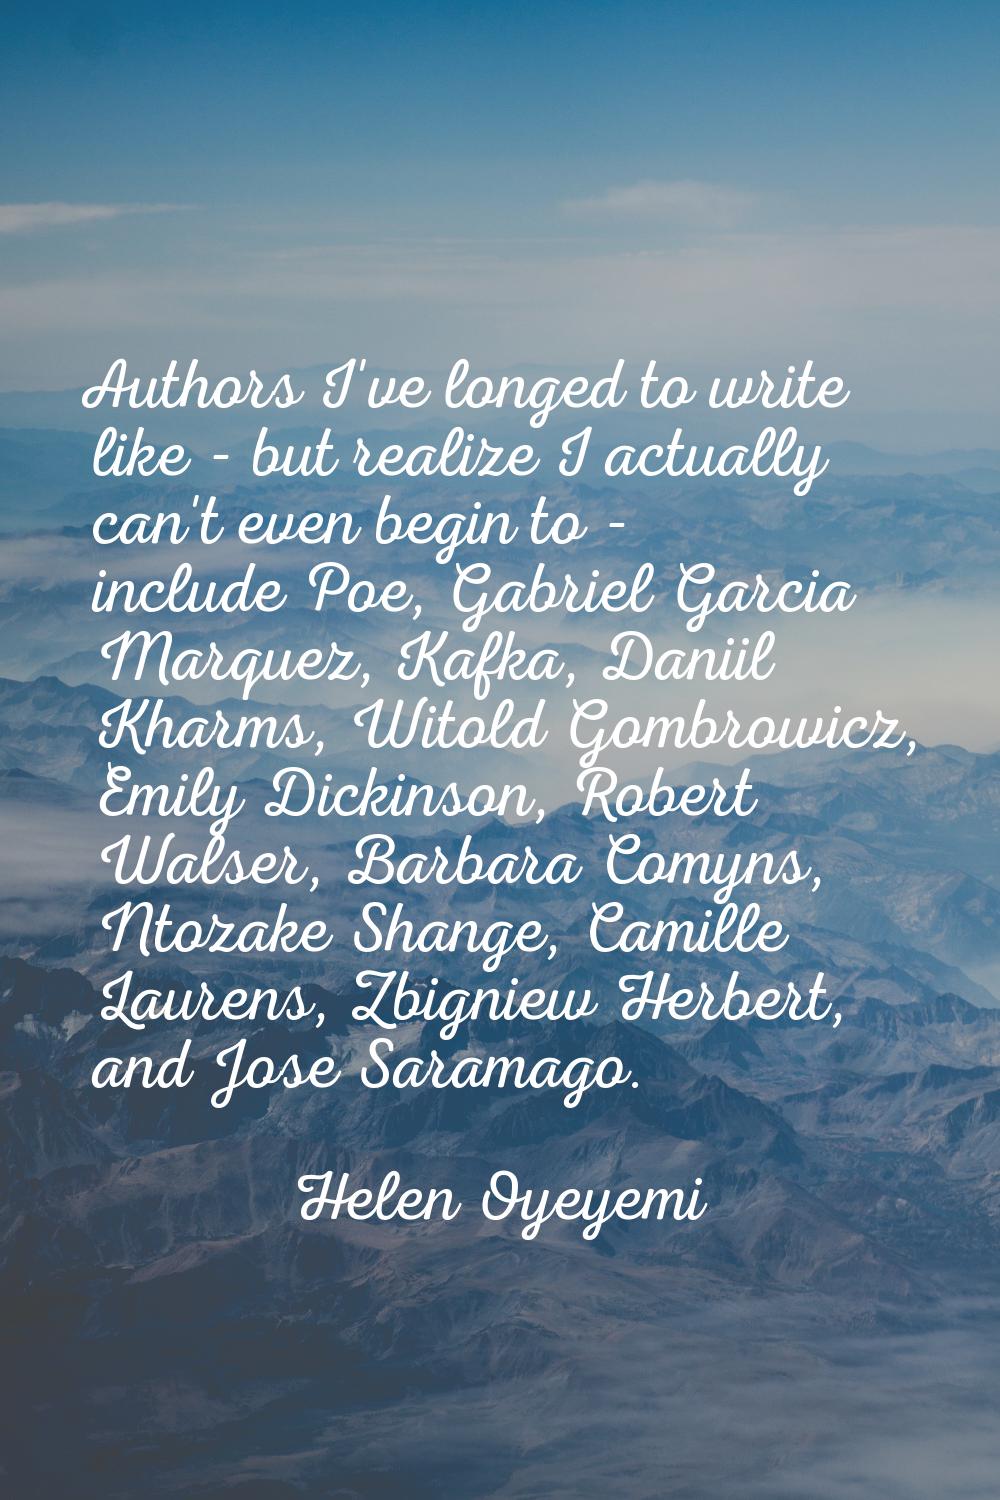 Authors I've longed to write like - but realize I actually can't even begin to - include Poe, Gabri